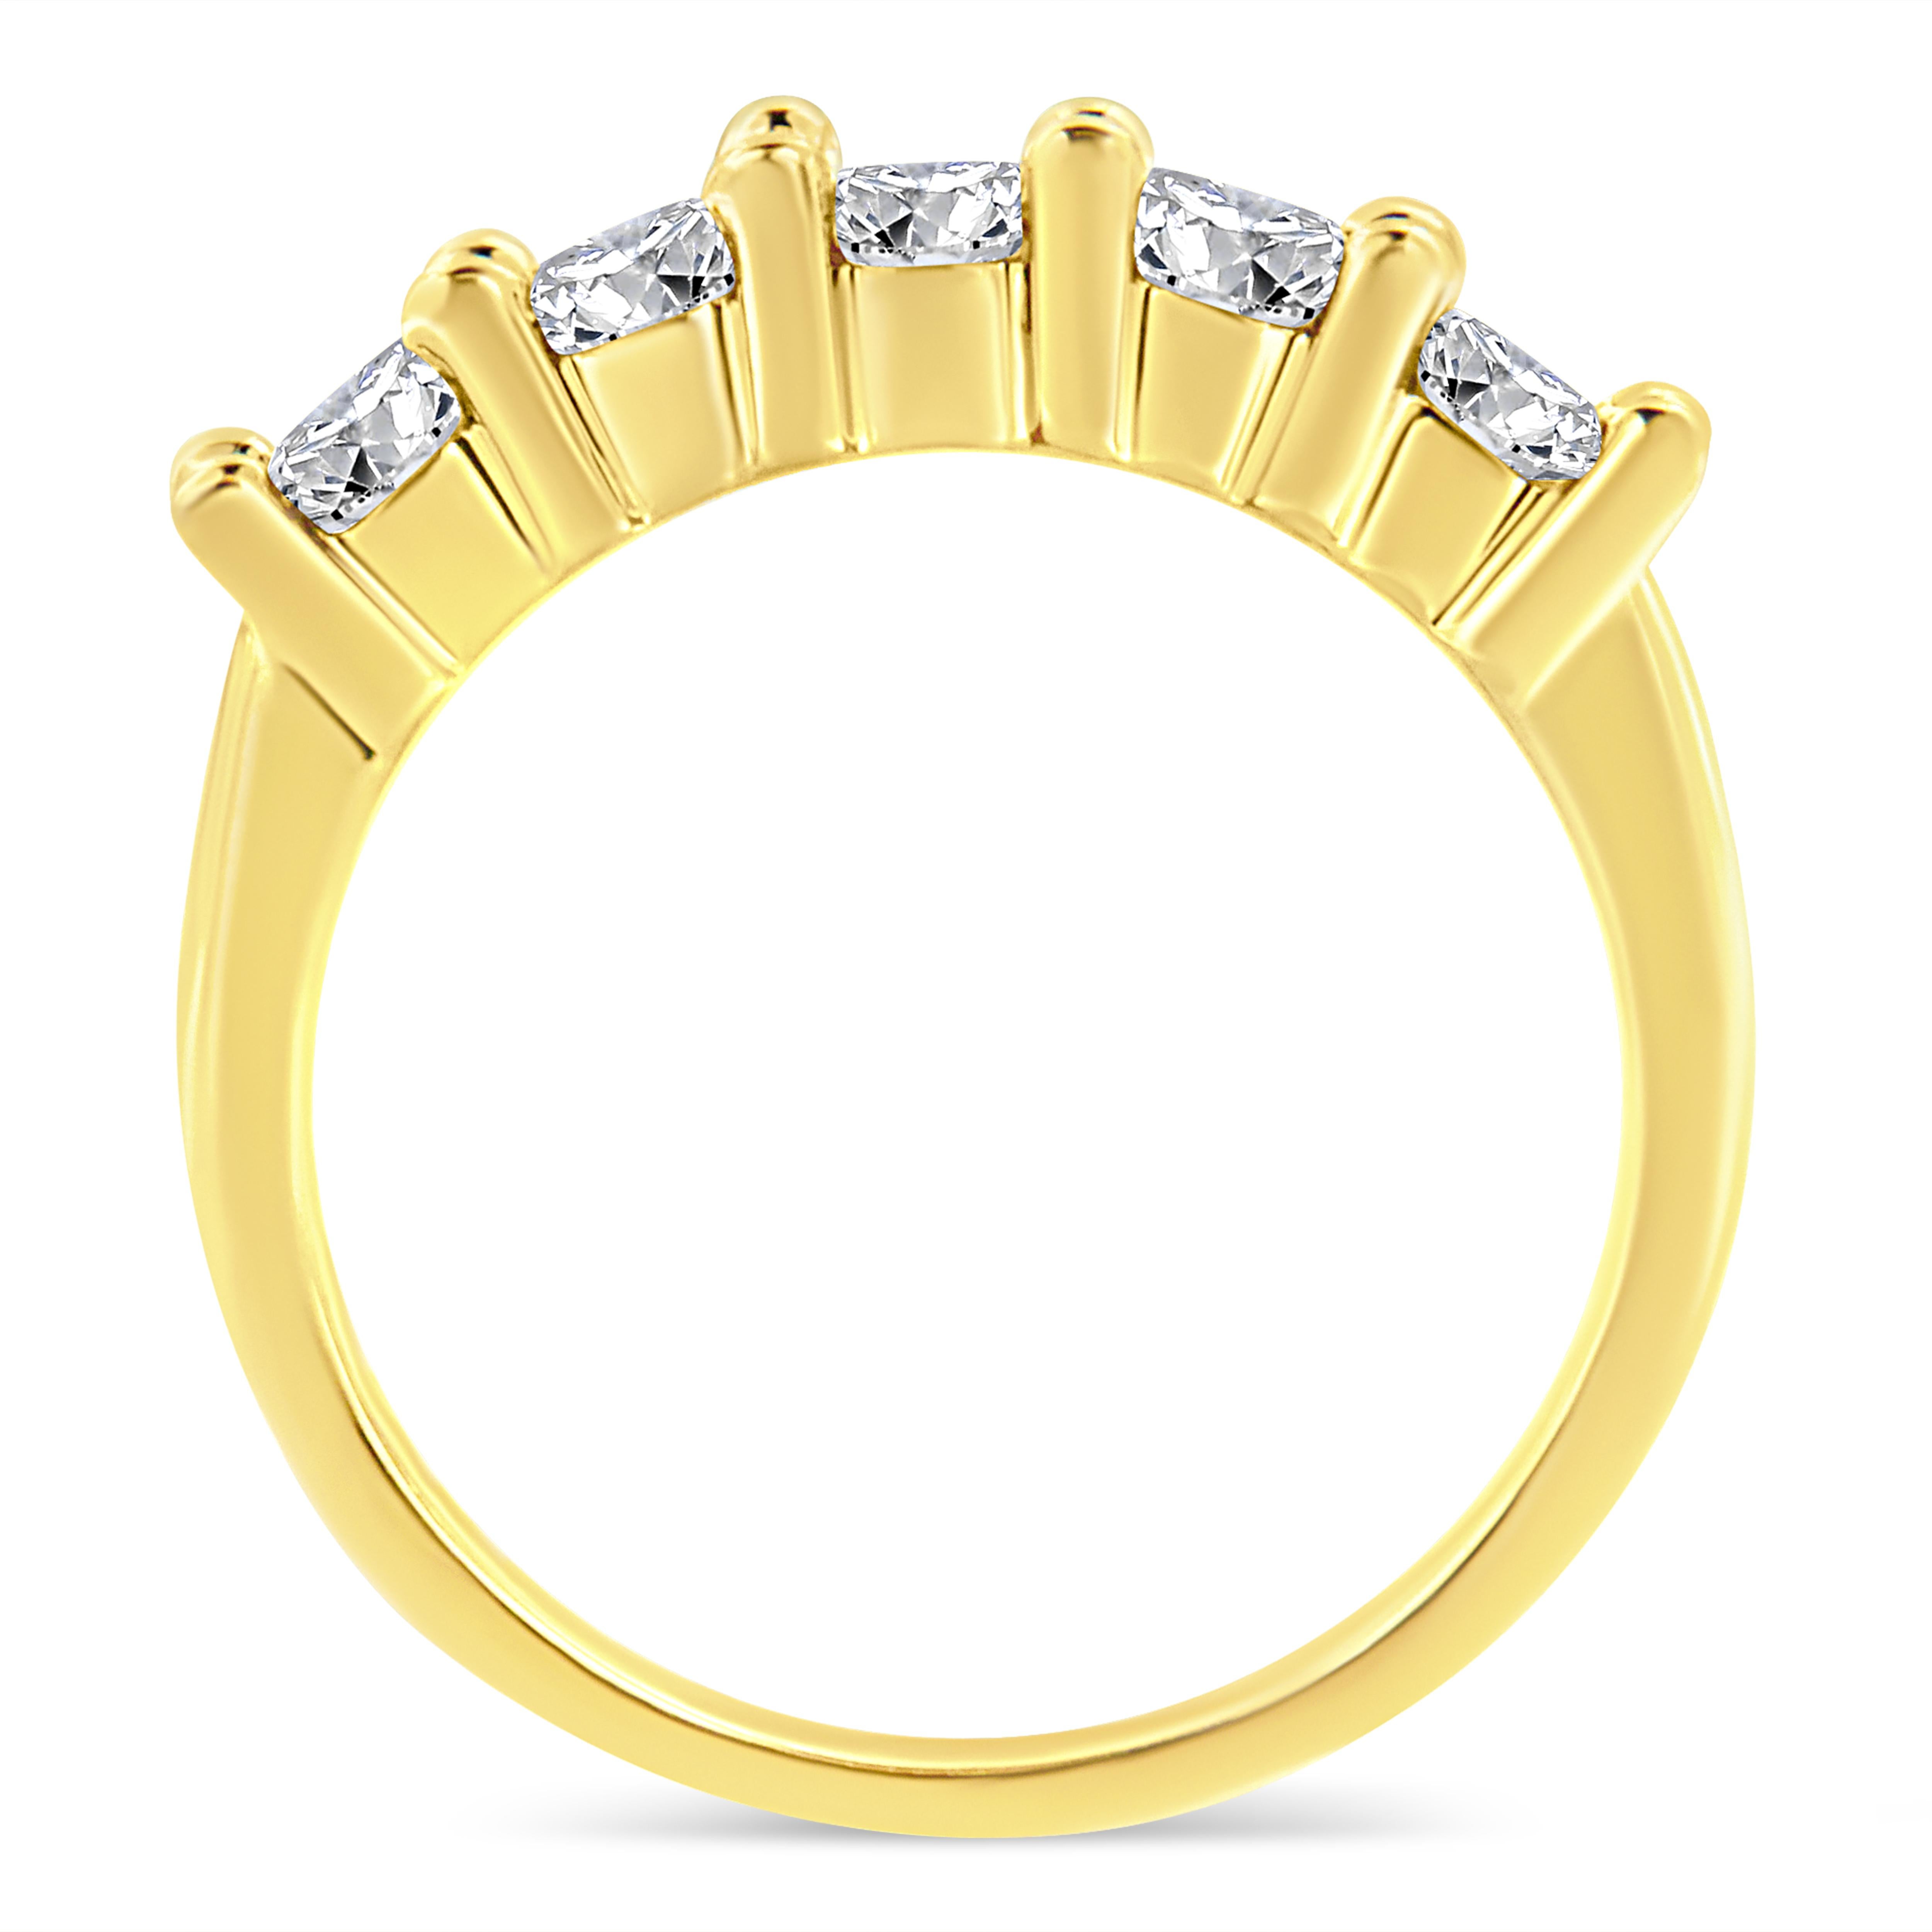 For Sale:  14k Yellow Gold Plated .925 Sterling Silver 1.0 Carat Diamond 5 Stone Band Ring 4